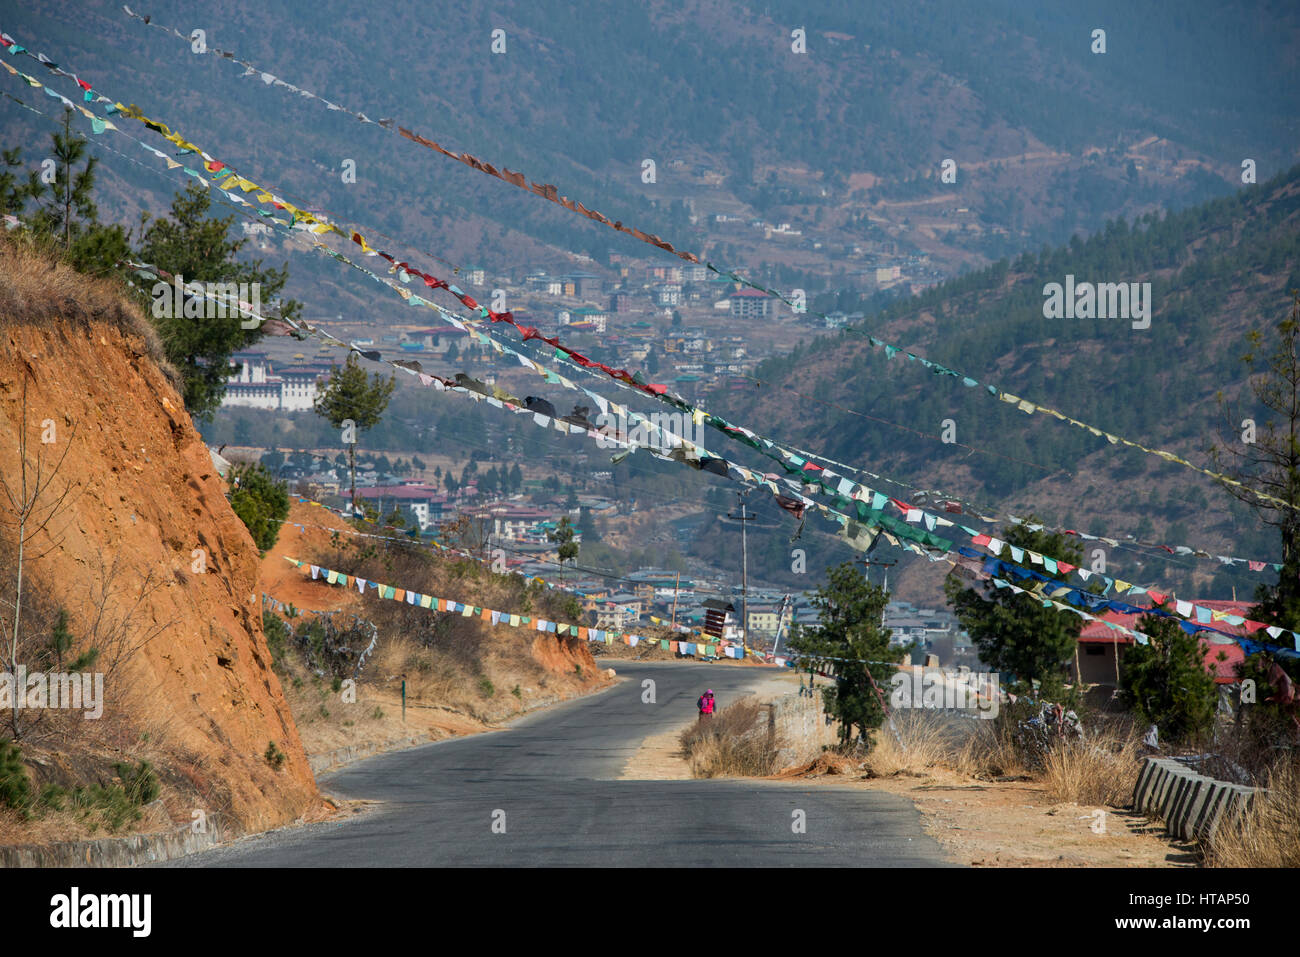 Bhutan, Thimphu. Typical roadside view with prayer flags and the city of Thimphu in the distance. Stock Photo